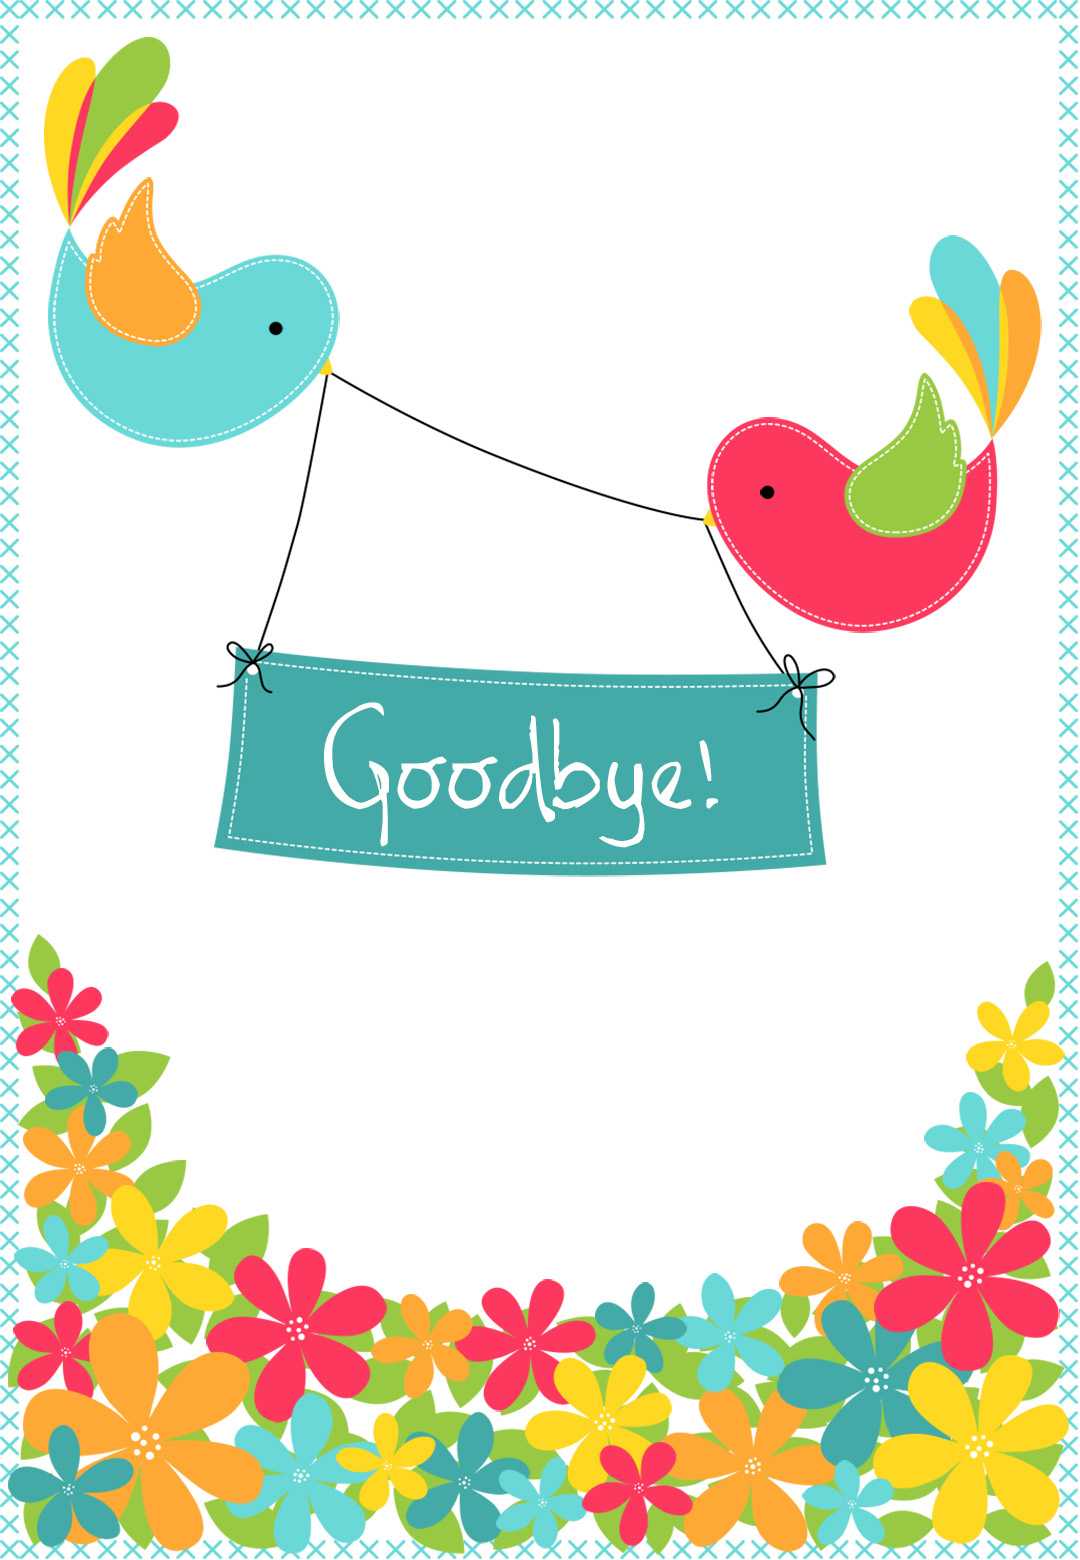 Goodbye From Your Colleagues – Good Luck Card (Free Throughout Good Luck Card Templates